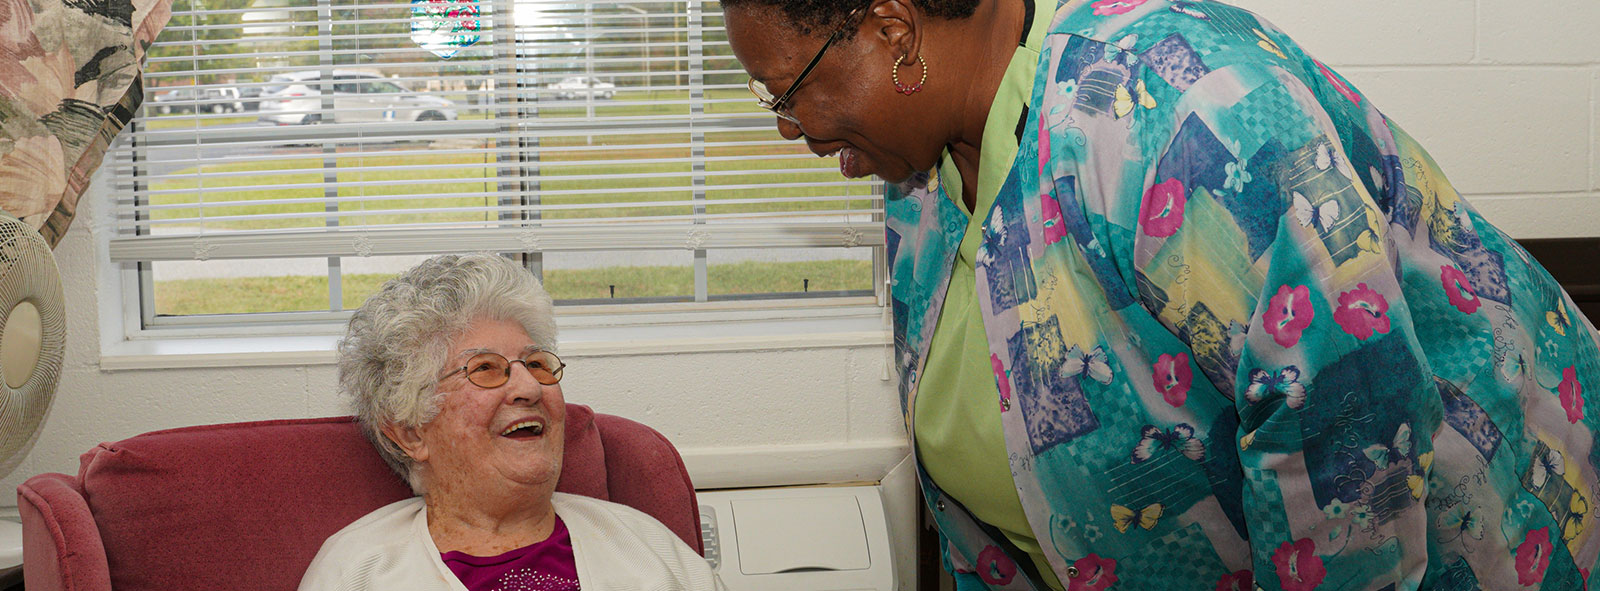 Nurse interacting with patient at skilled nursing facility.